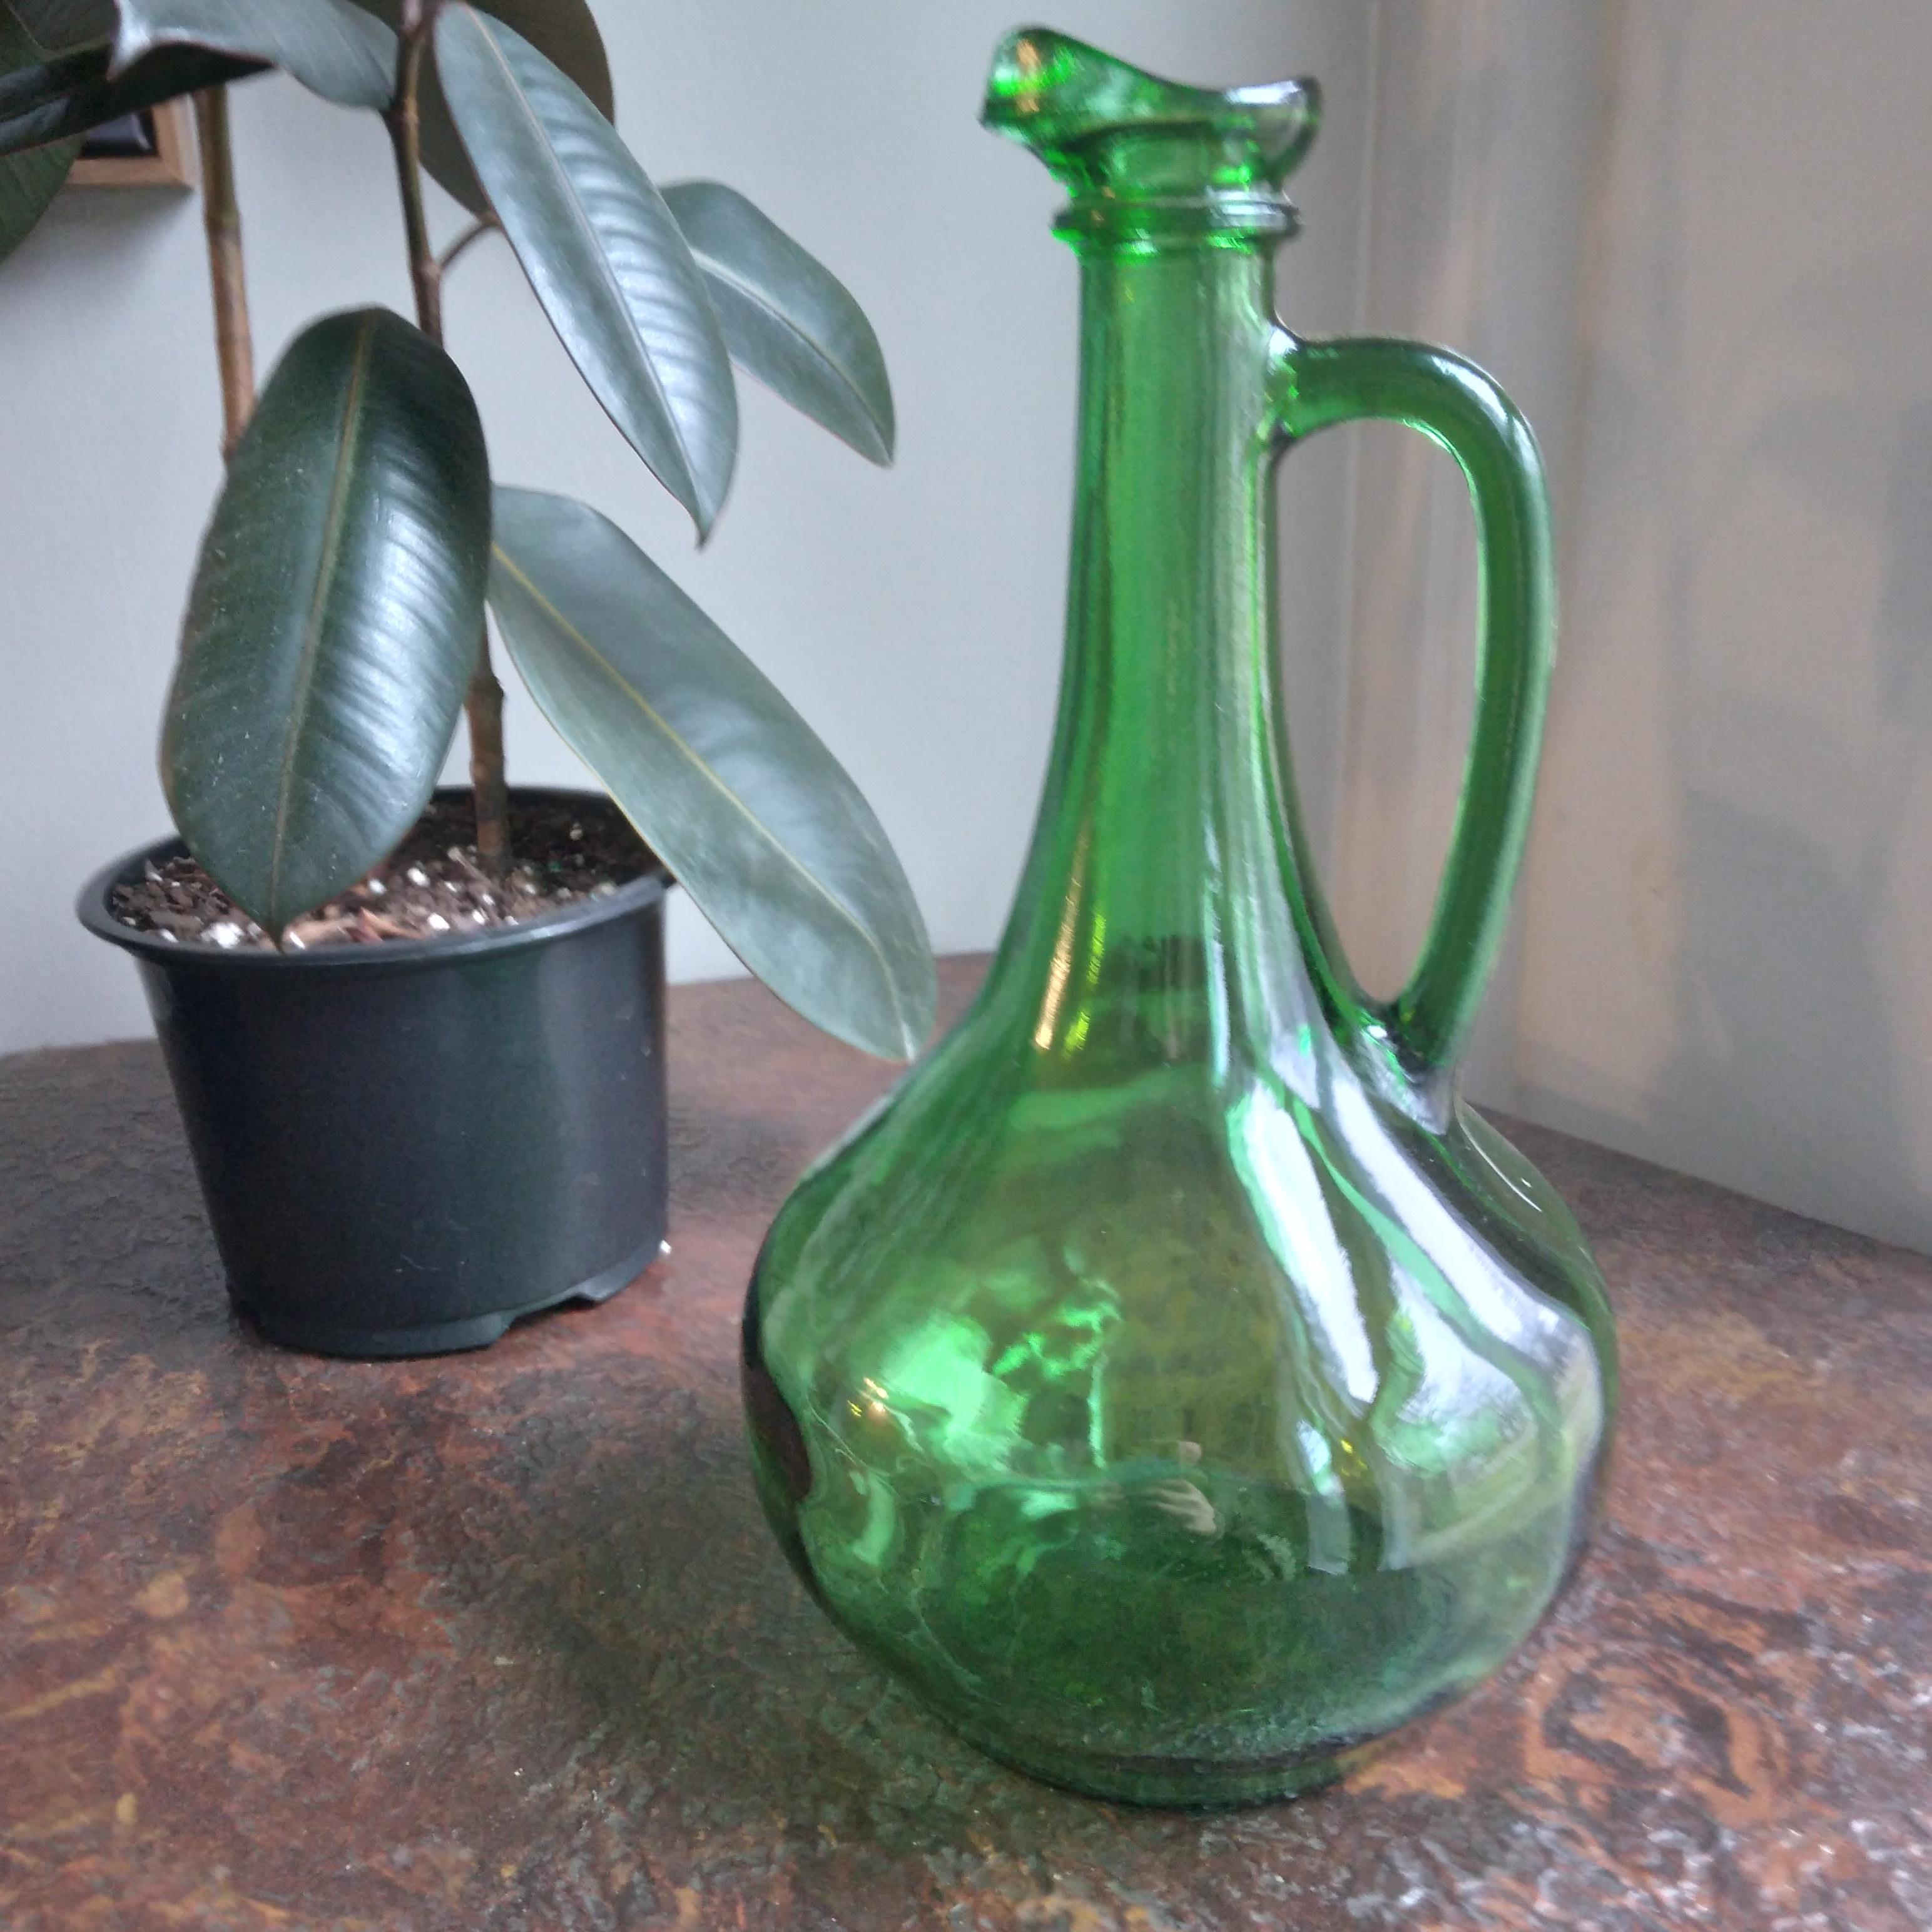 Graceful and green... this vintage wine decanter is simply stunning. We love her long neck, slender handle and generously curved base. The thick walled glass is in excellent condition. She would make an excellent pitcher or look great as a display